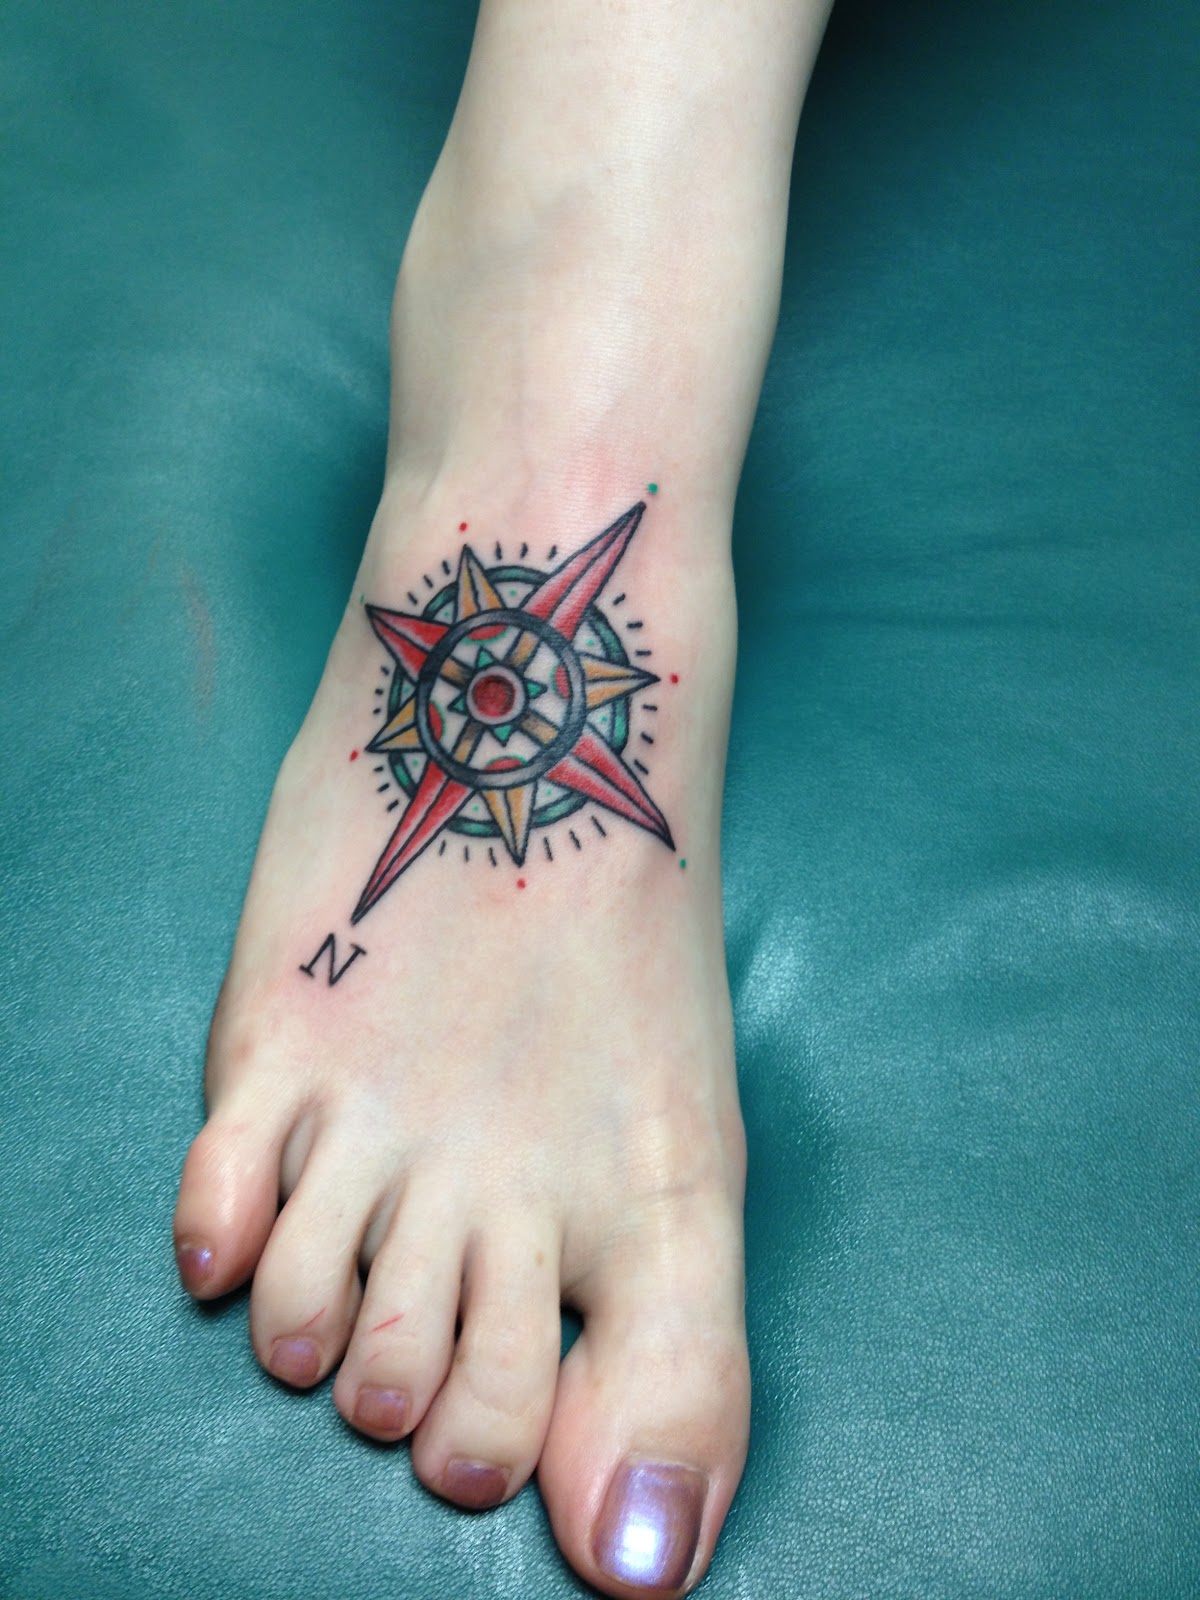 Compass Tattoos Designs, Ideas and Meaning | Tattoos For You